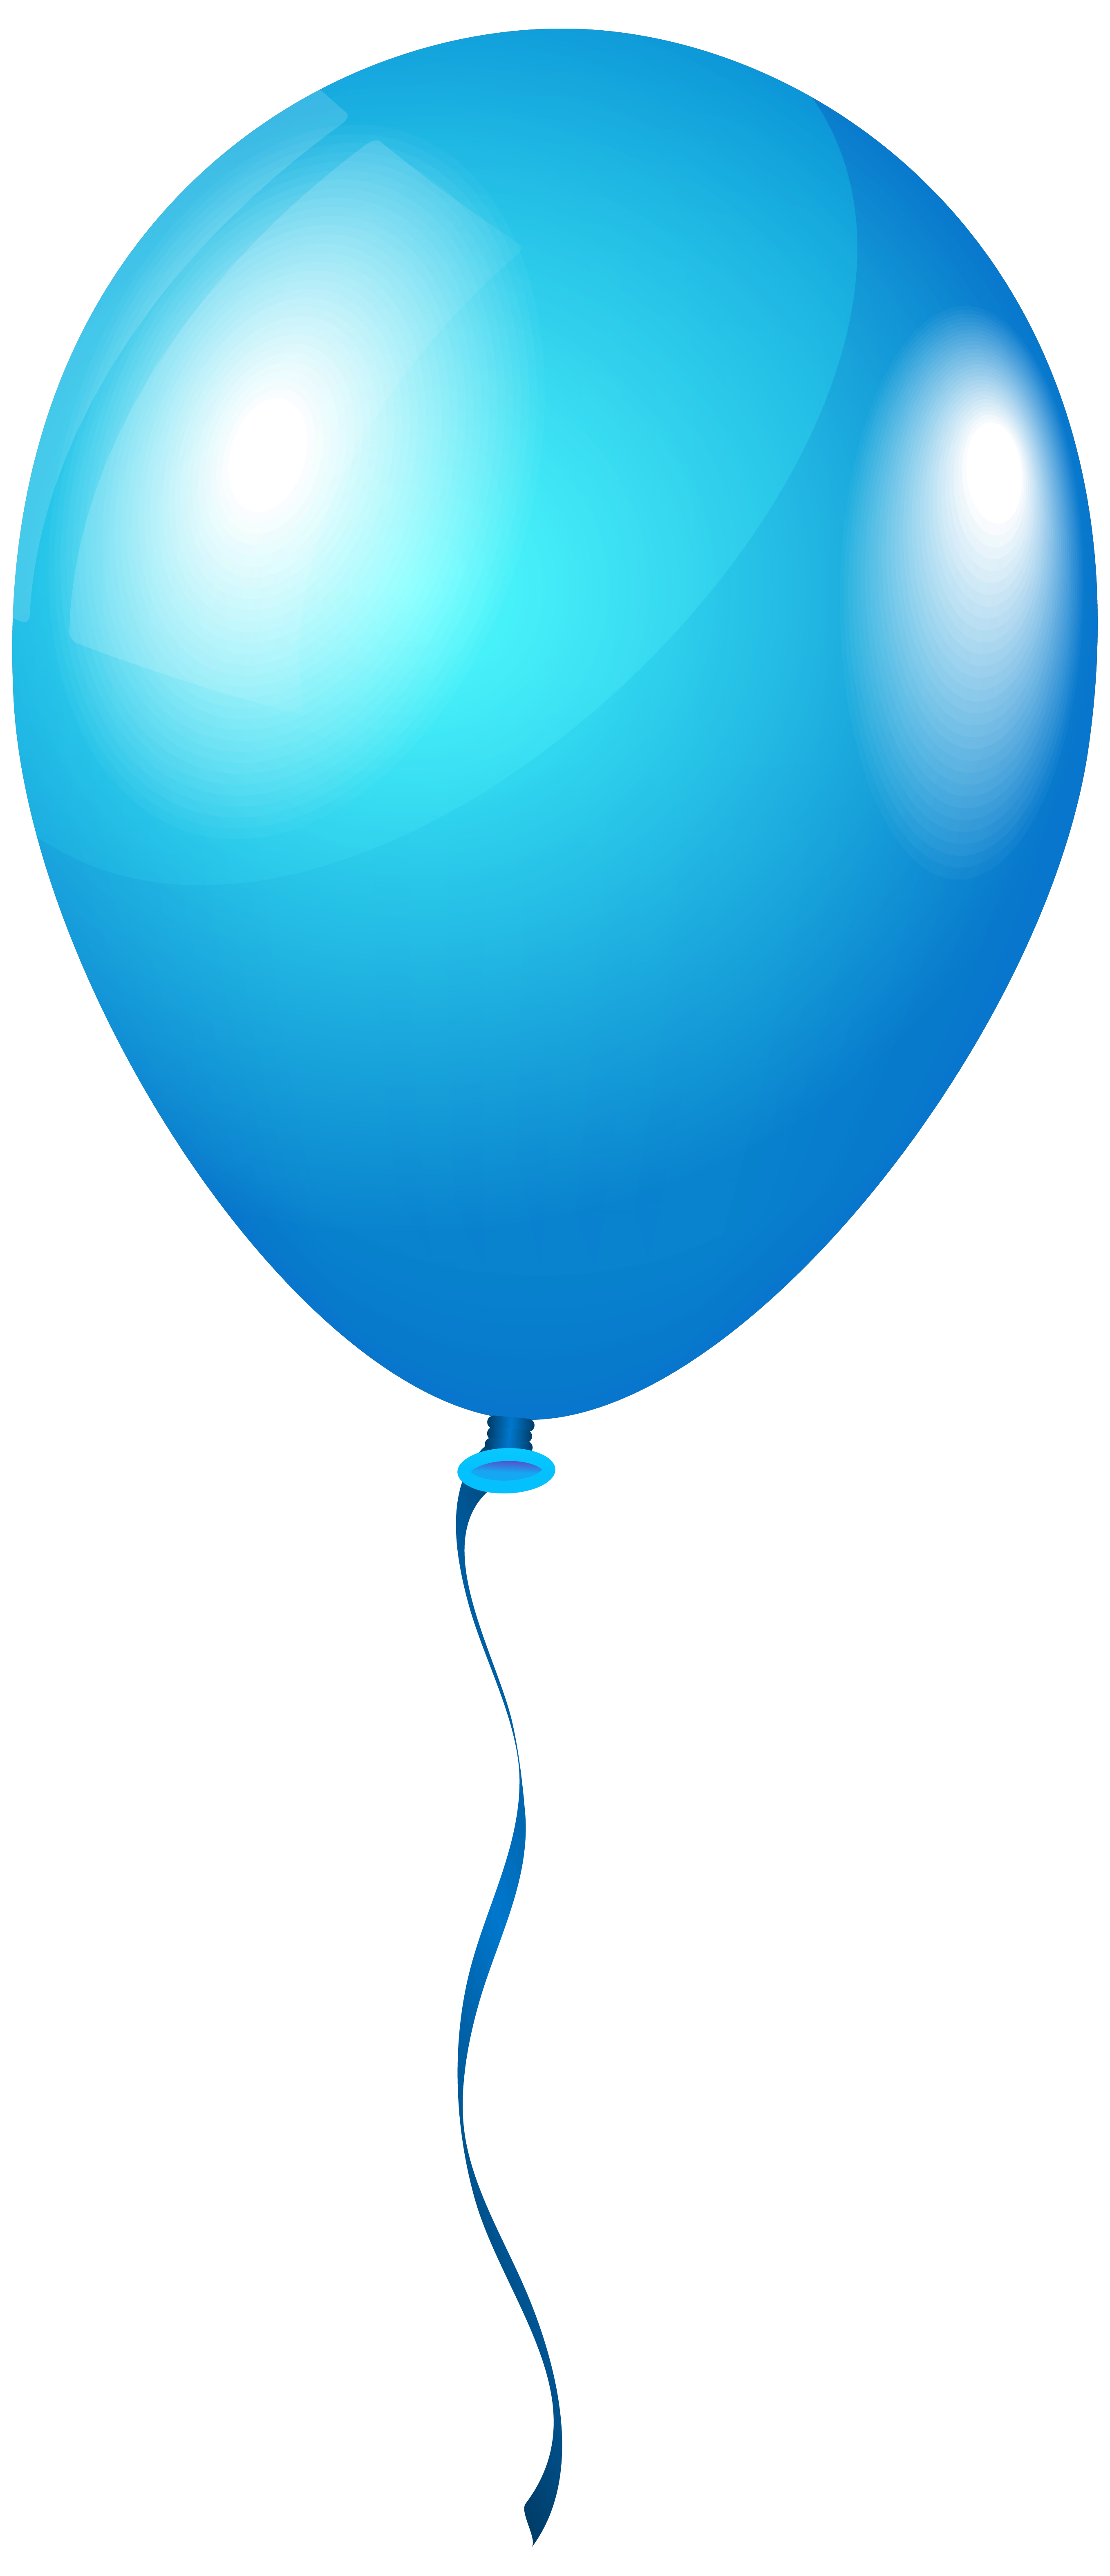 Single BlueBalloon PNG Clipart Image 